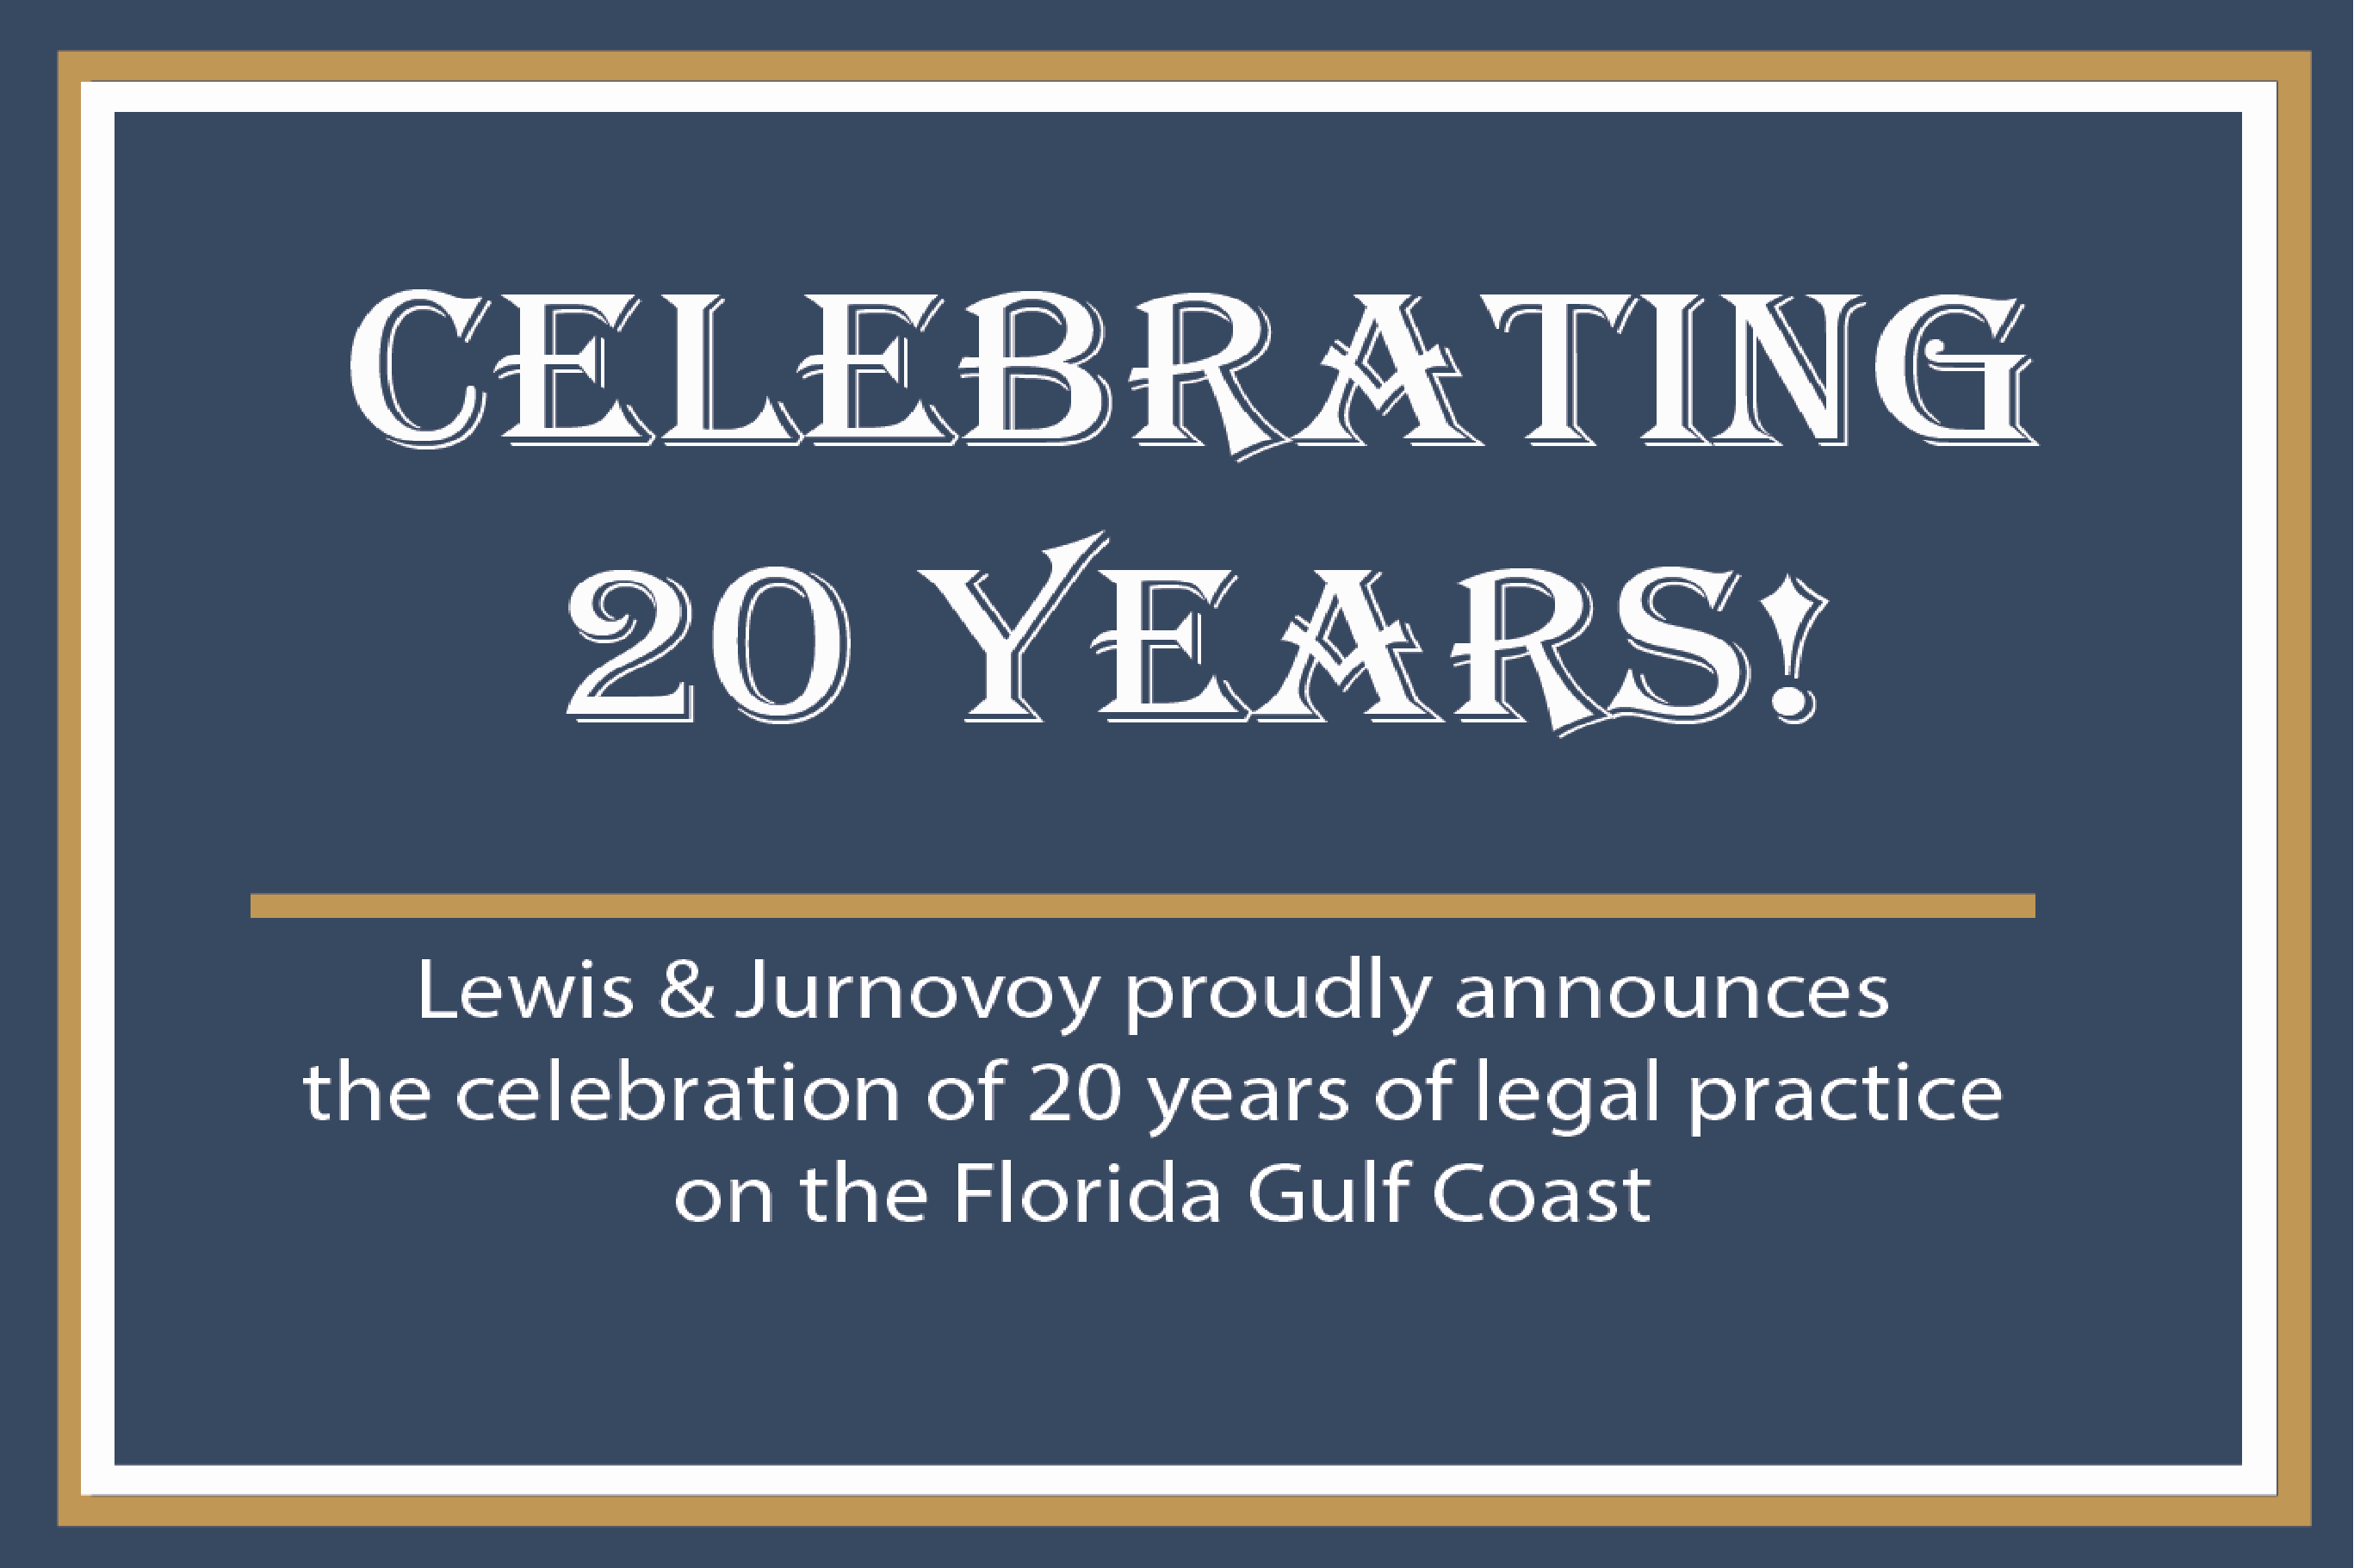 Bankruptcy Lawyers in Pensacola Celebrate 20 Years